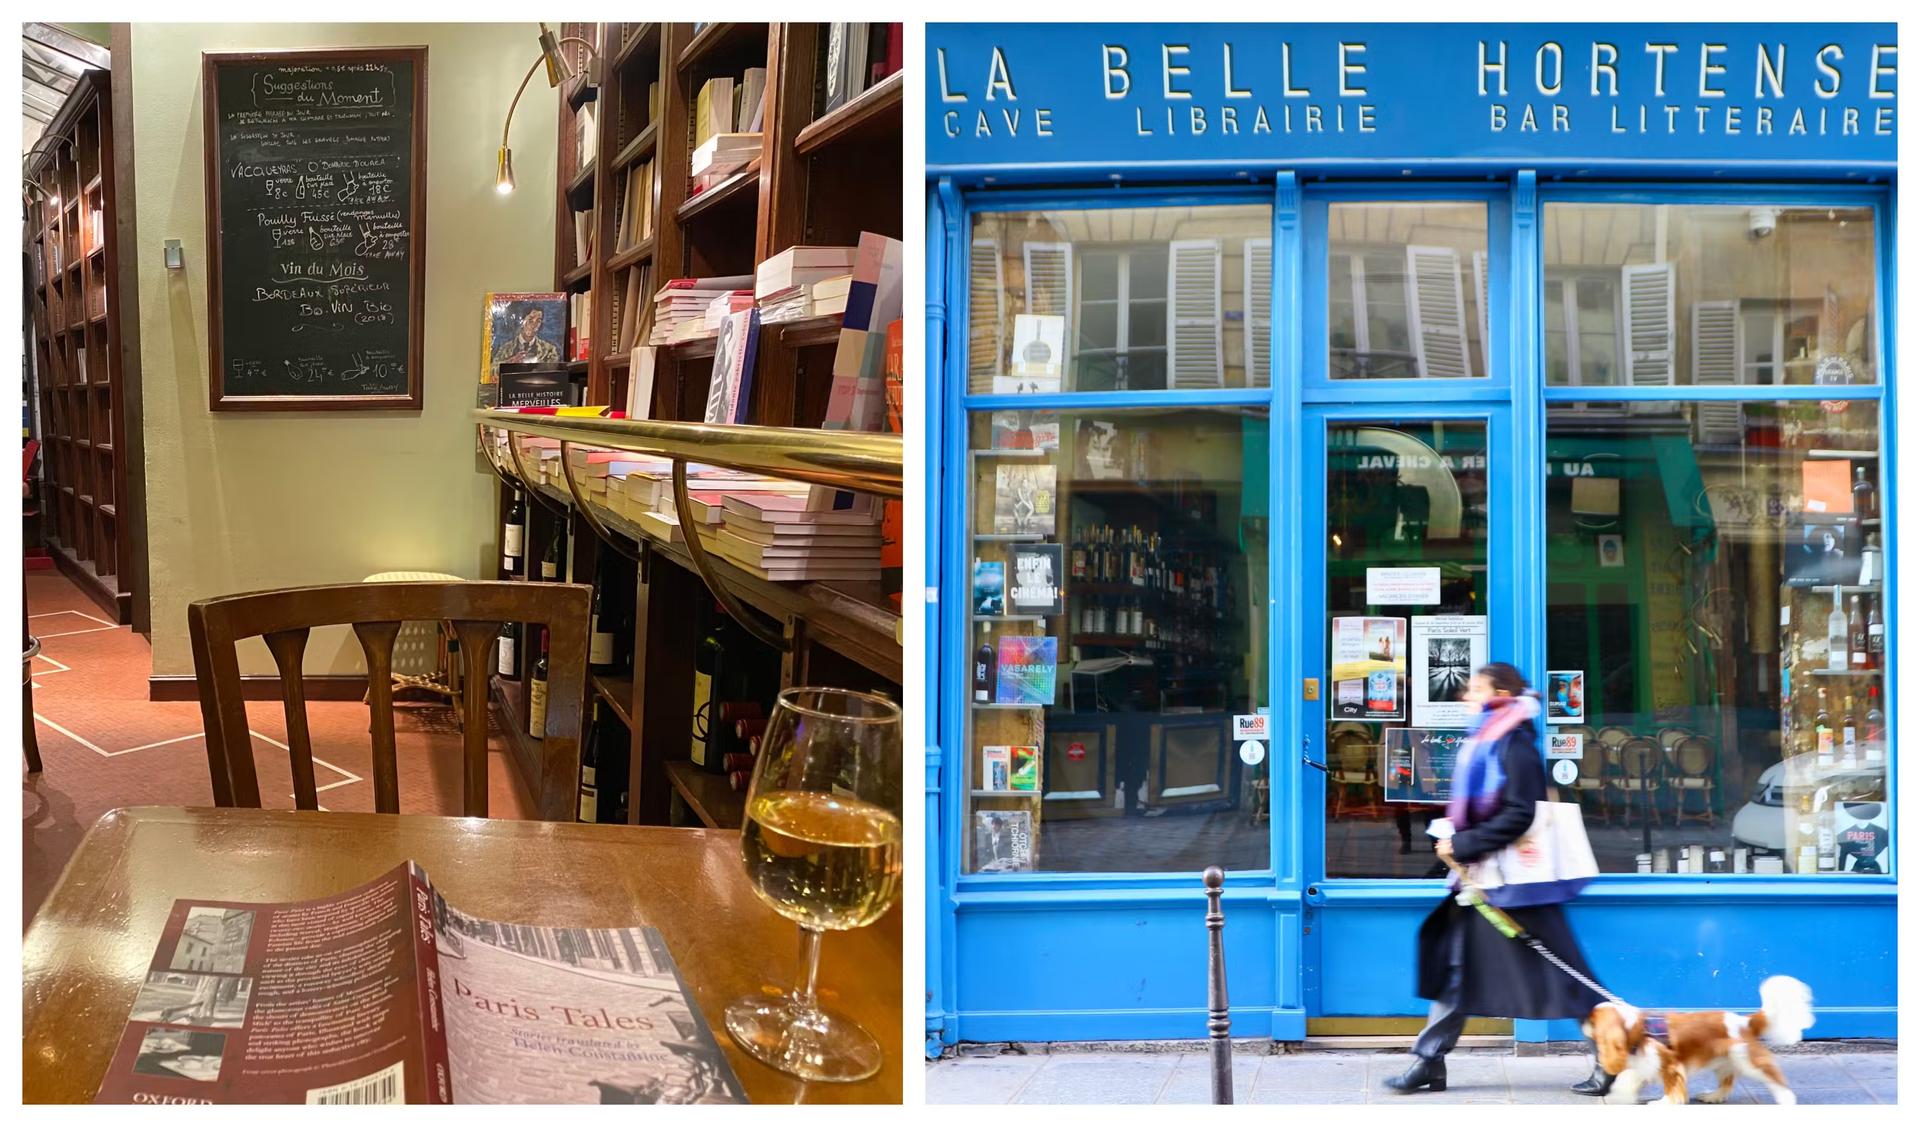 Reading in La Belle Hortense with a glass of wine